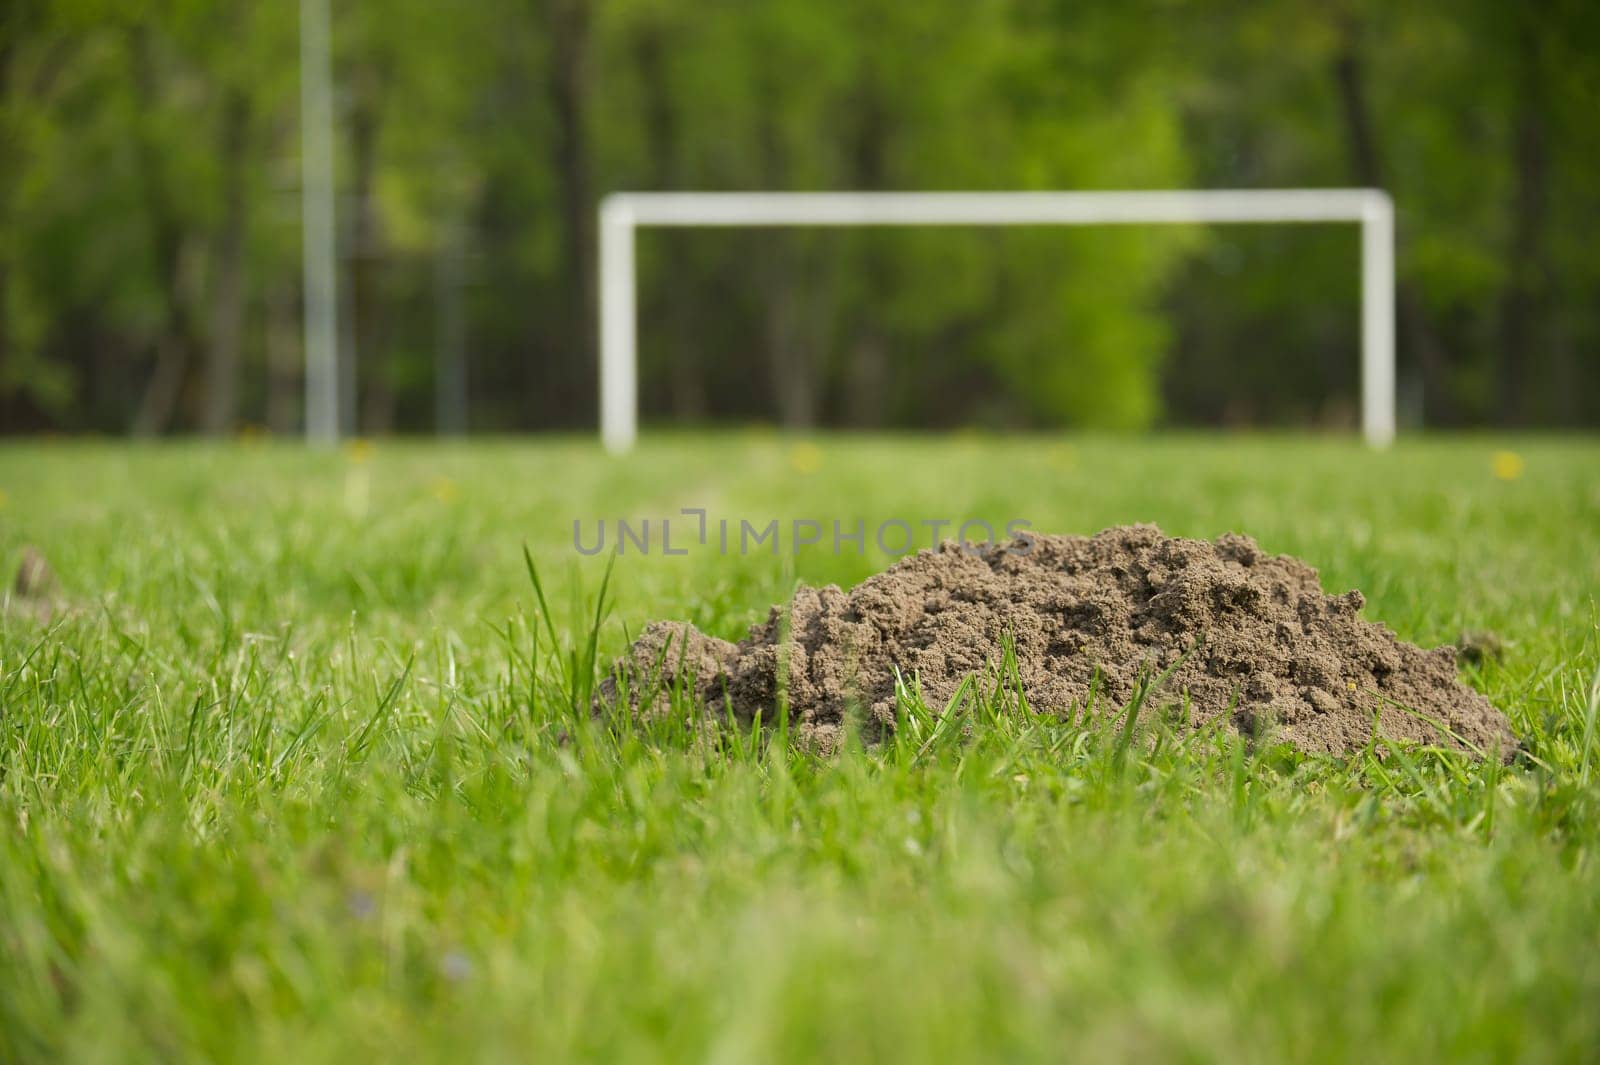 Football pitch with large mole hole in foreground by NetPix